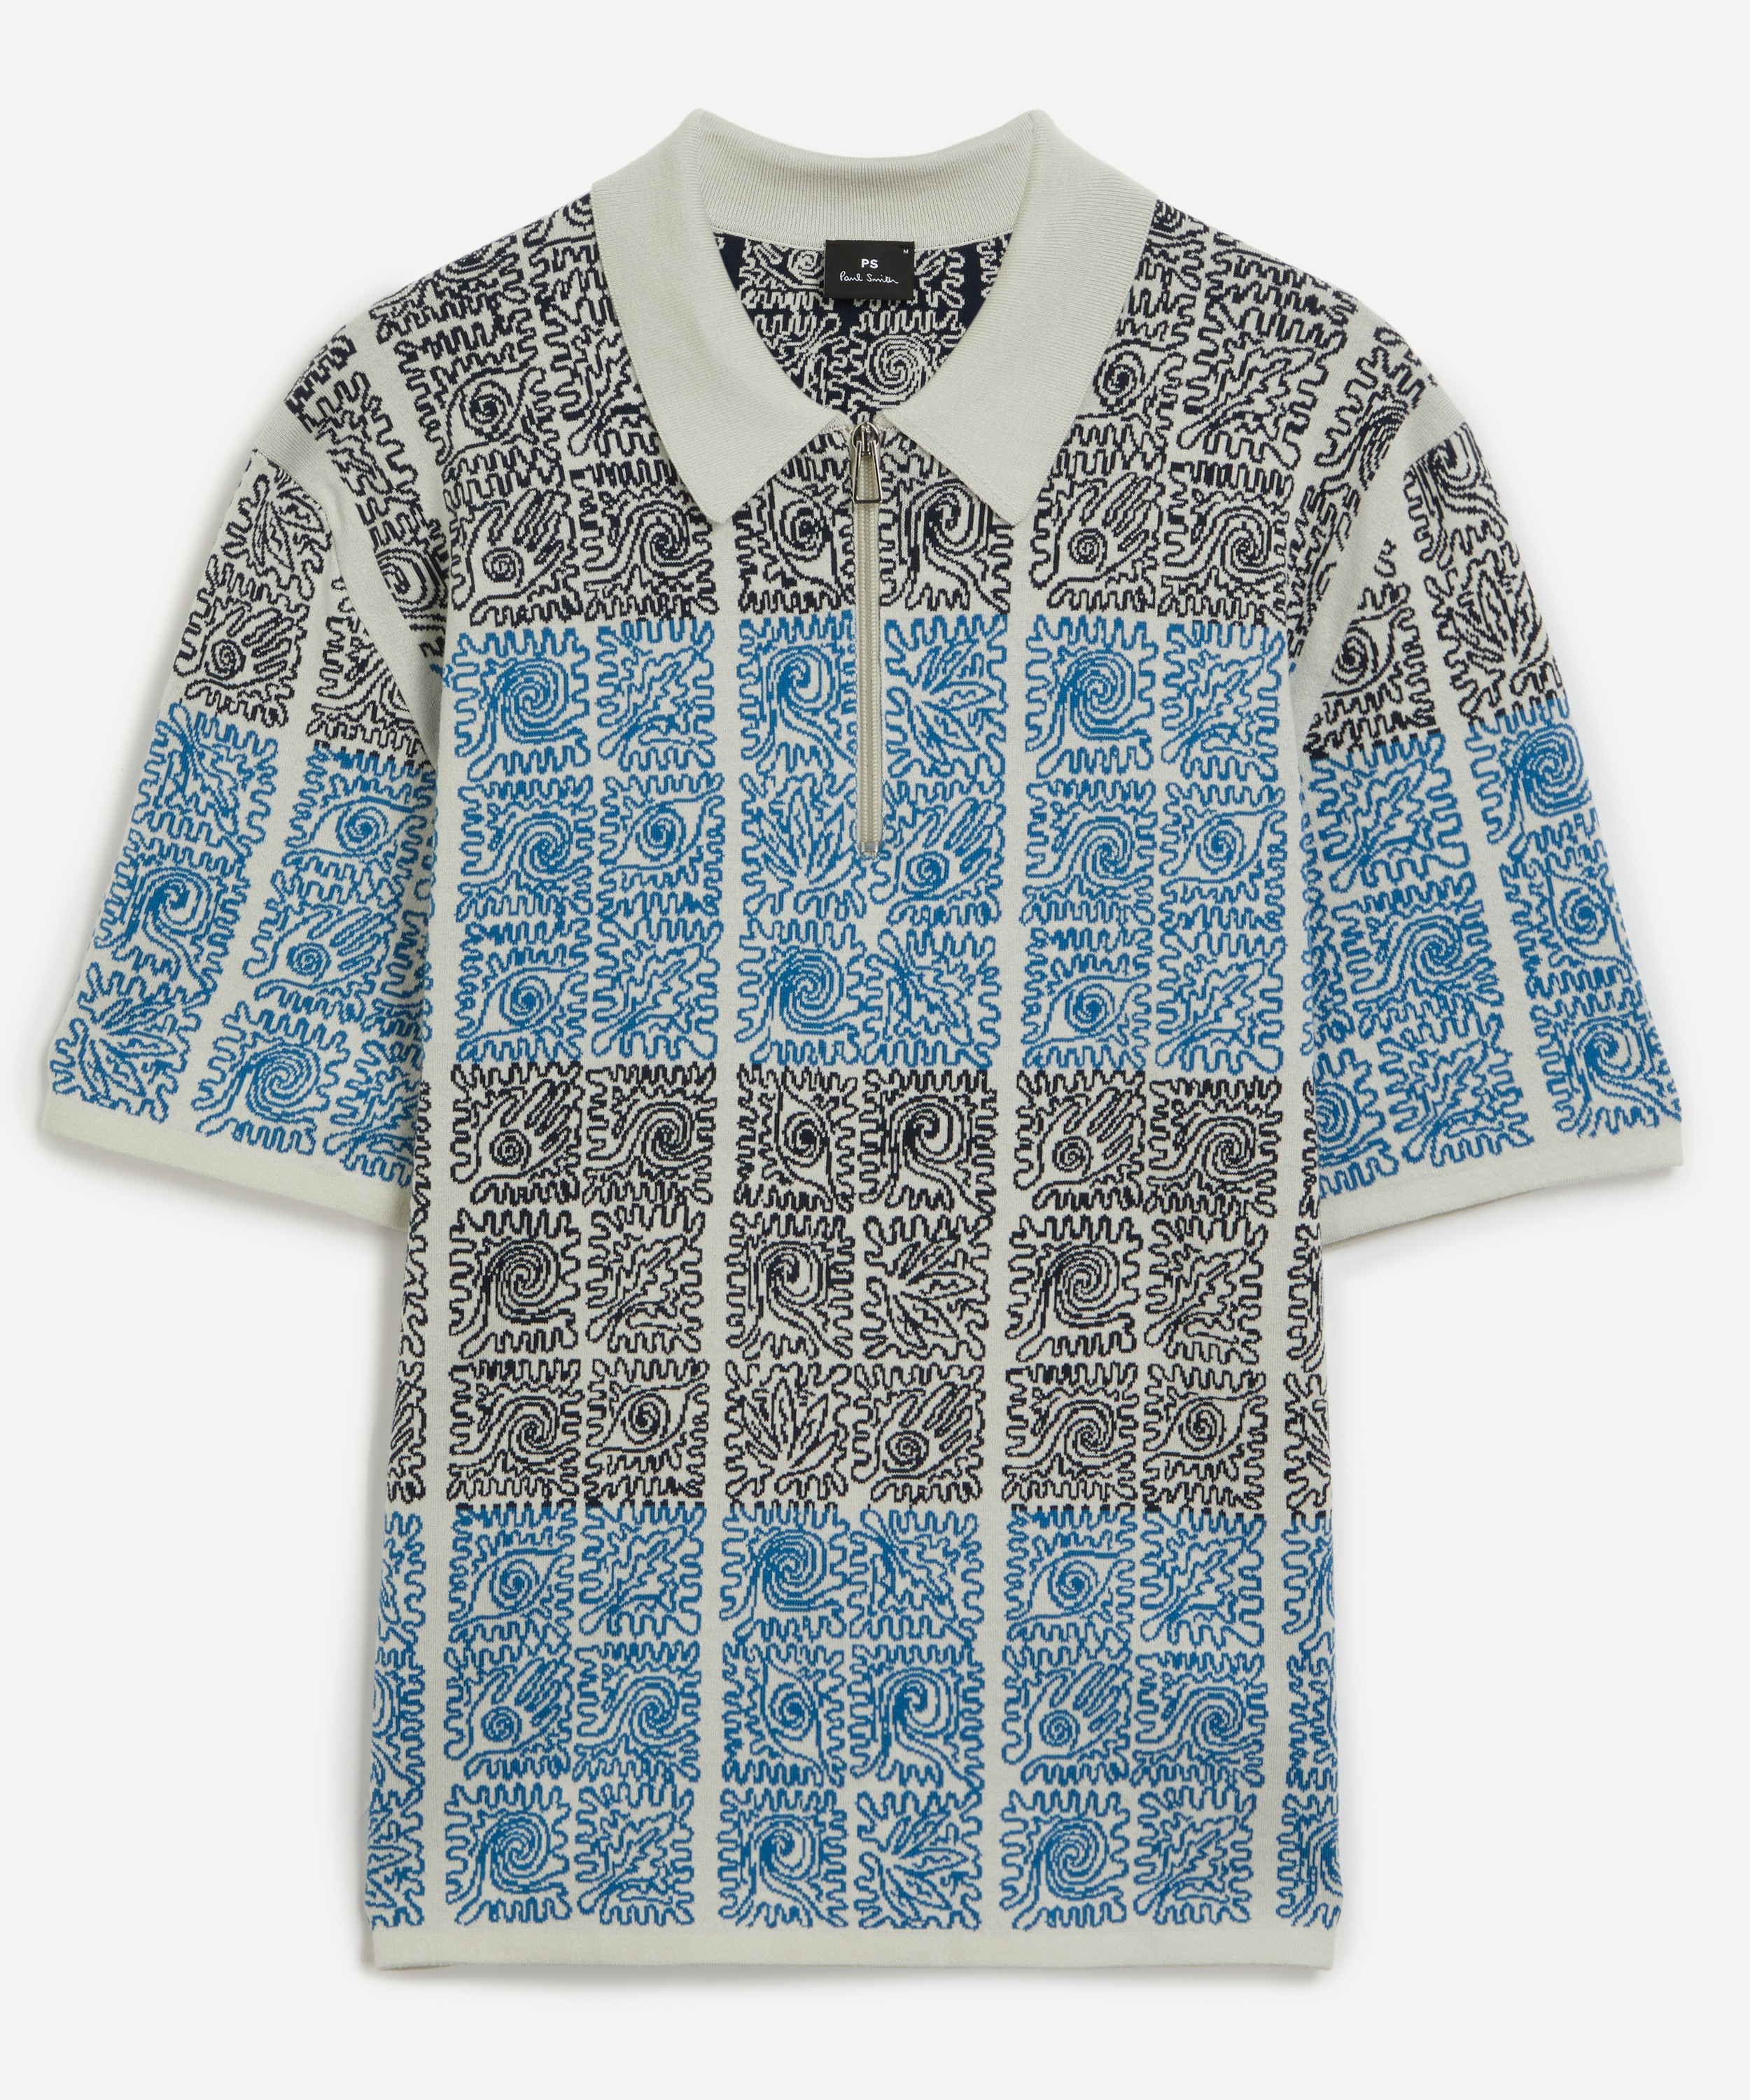 PS Paul Smith - Patterned Jacquard Knit Polo